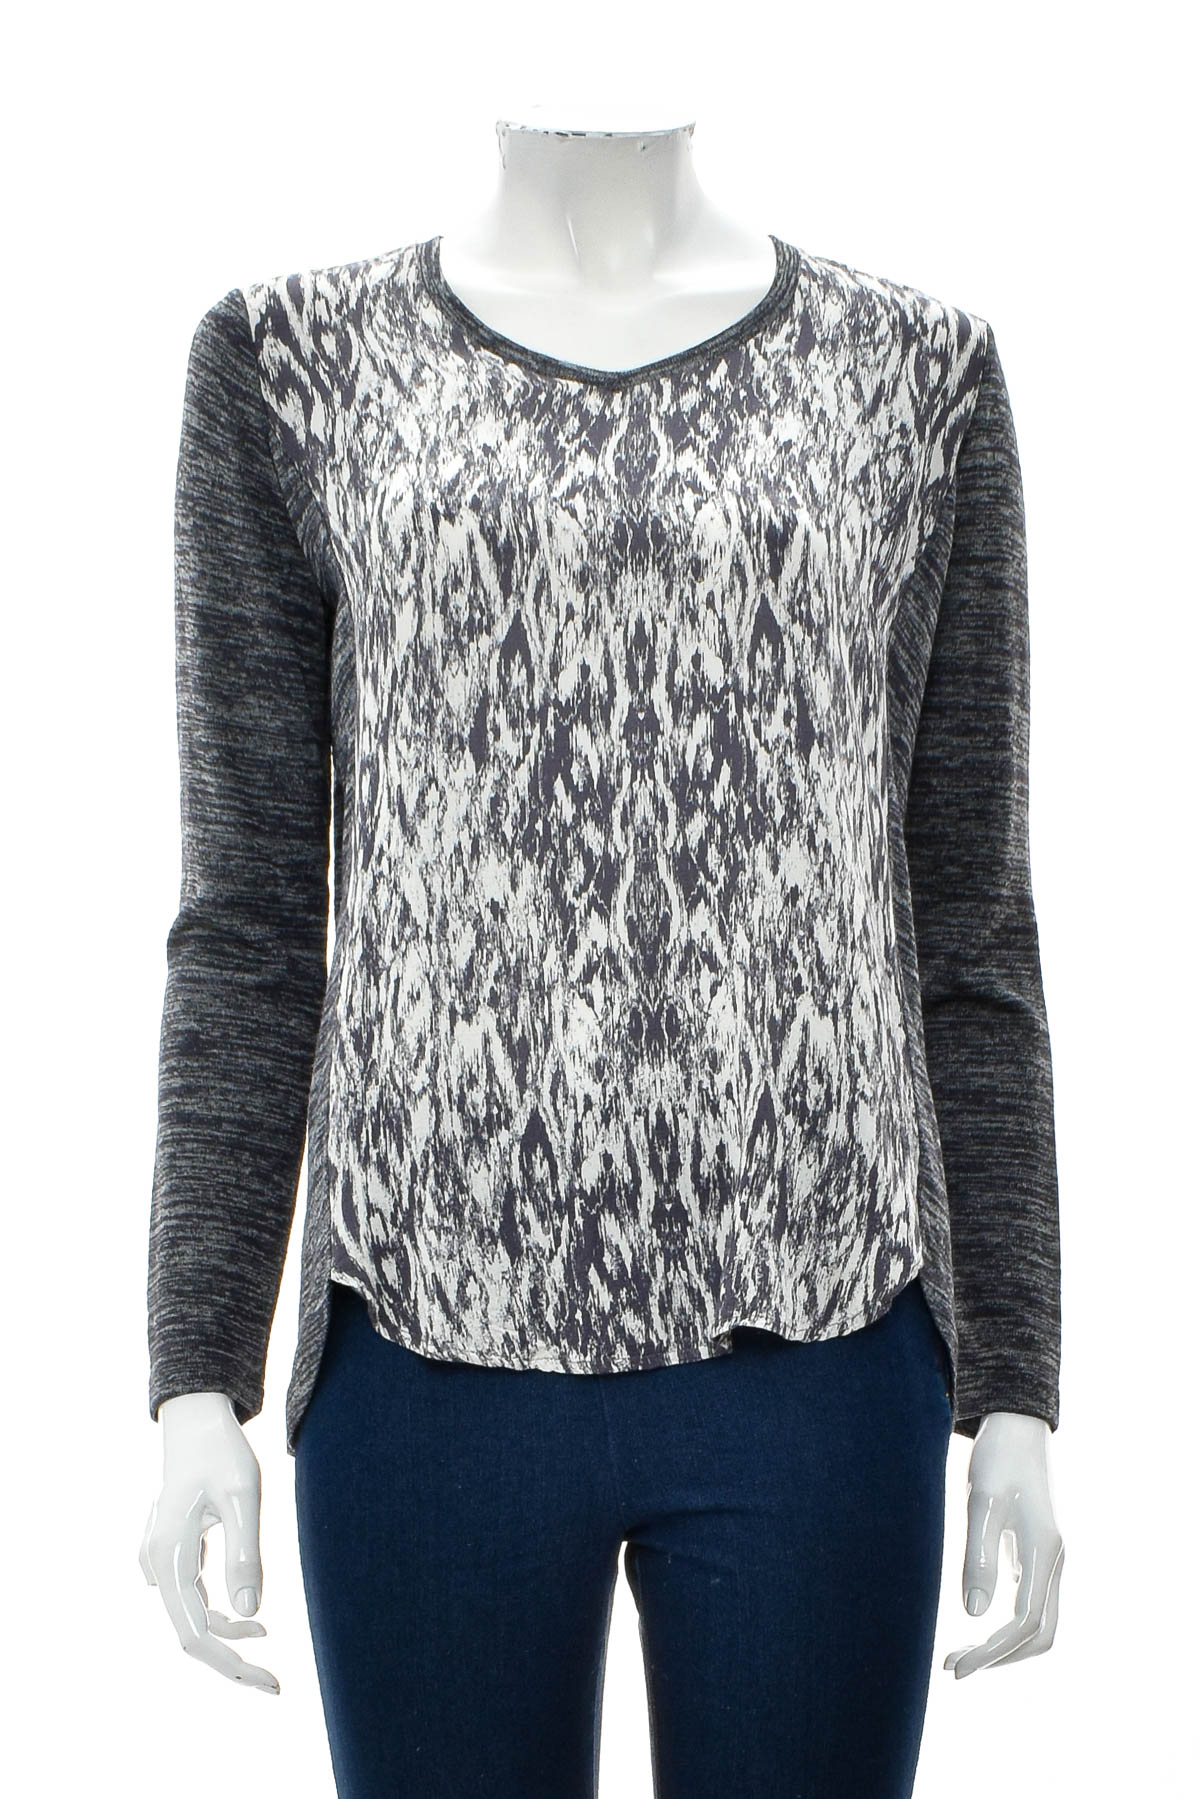 Women's sweater - Target Collection - 0